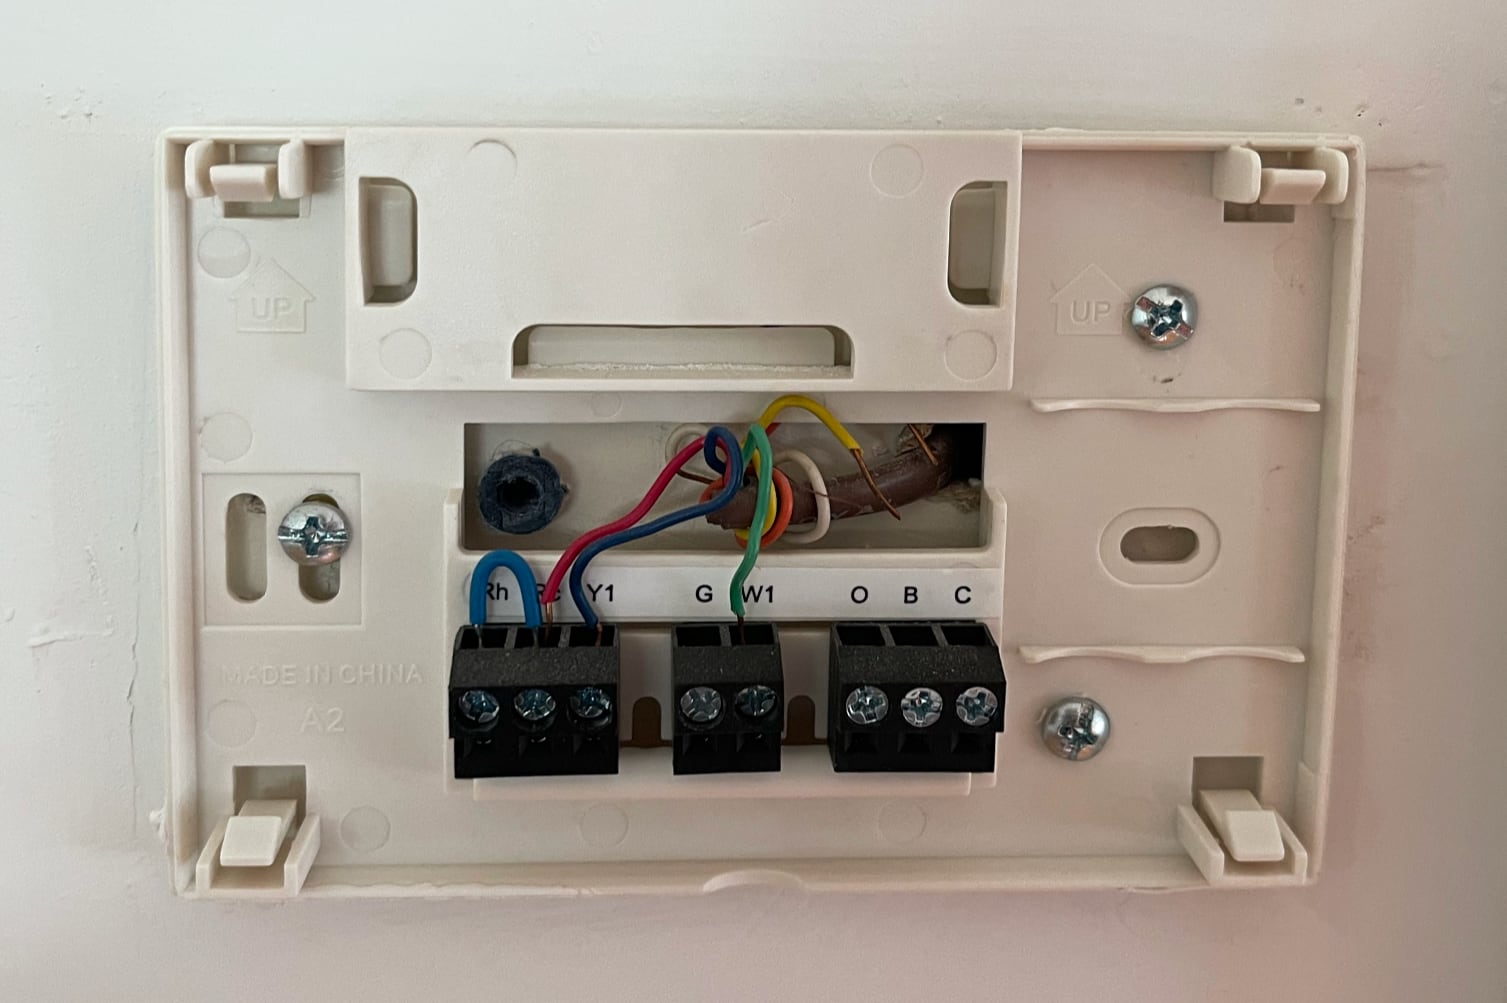 Original wiring of the first floor thermostat